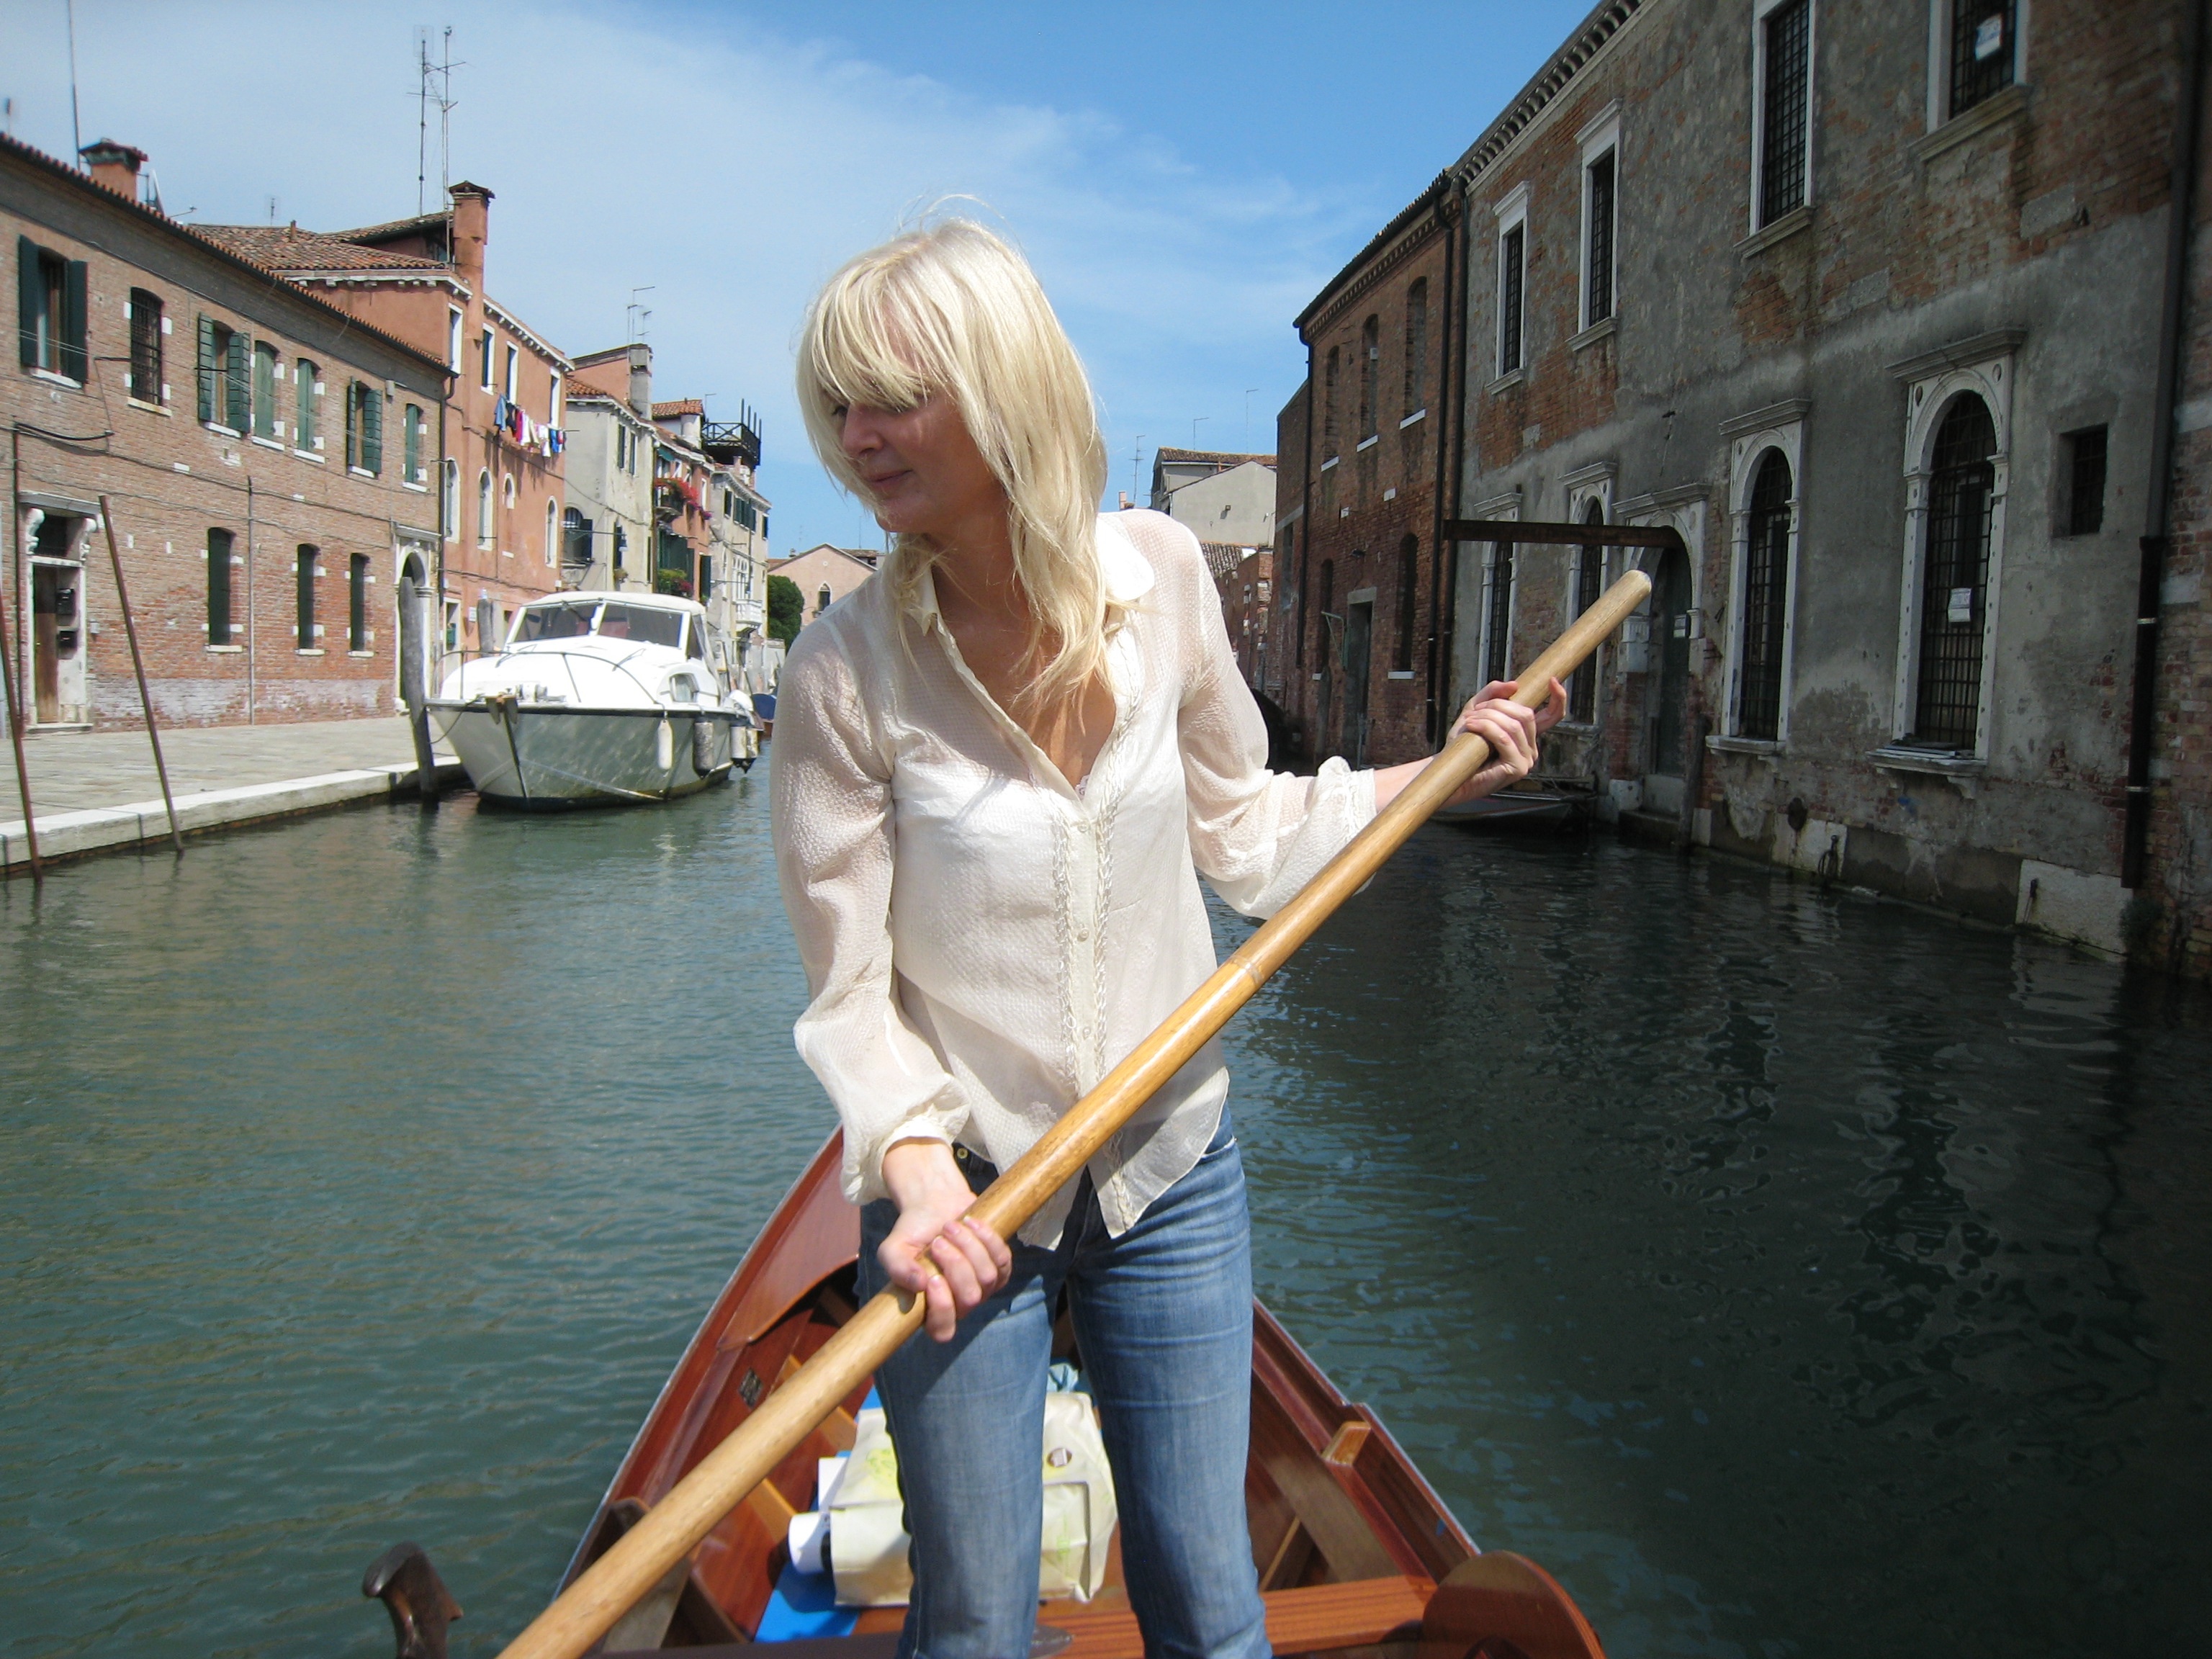 Paddling the Venice Canals, Broads Abroad